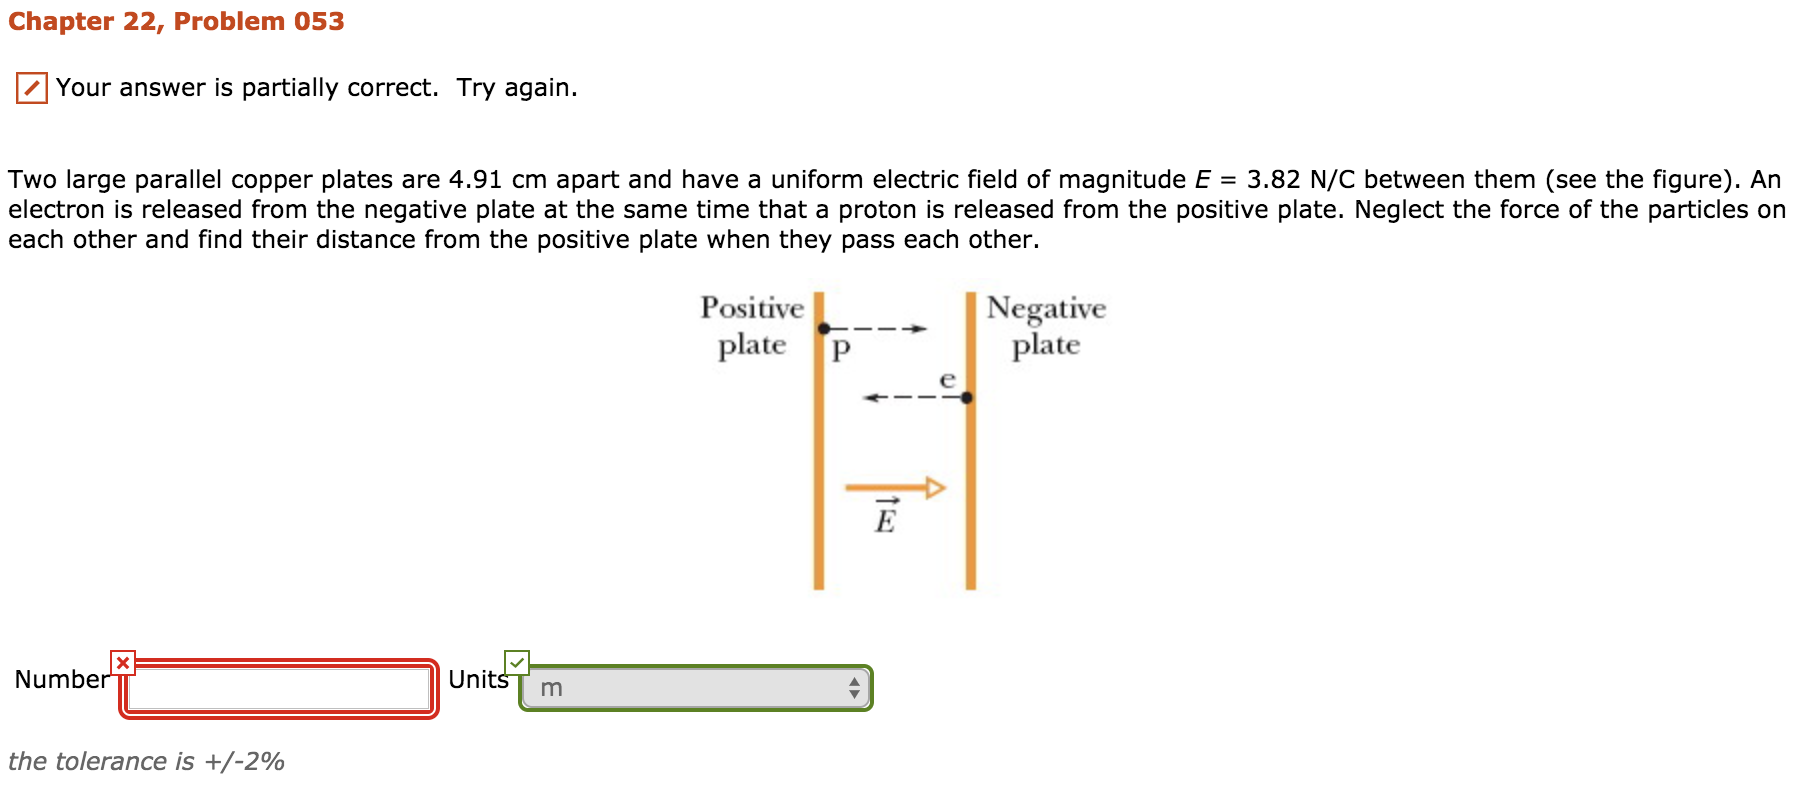 Chapter 22, Problem 053
/1 Your answer is partially correct. Try again.
Two large parallel copper plates are 4.91 cm apart and have a uniform electric field of magnitude E = 3.82 N/C between them (see the figure). An
electron is released from the negative plate at the same time that a proton is released from the positive plate. Neglect the force of the particles on
each other and find their distance from the positive plate when they pass each other.
Negative
plate
Positive
plate
UnitšT m
Numbe
the tolerance is +/-2%
